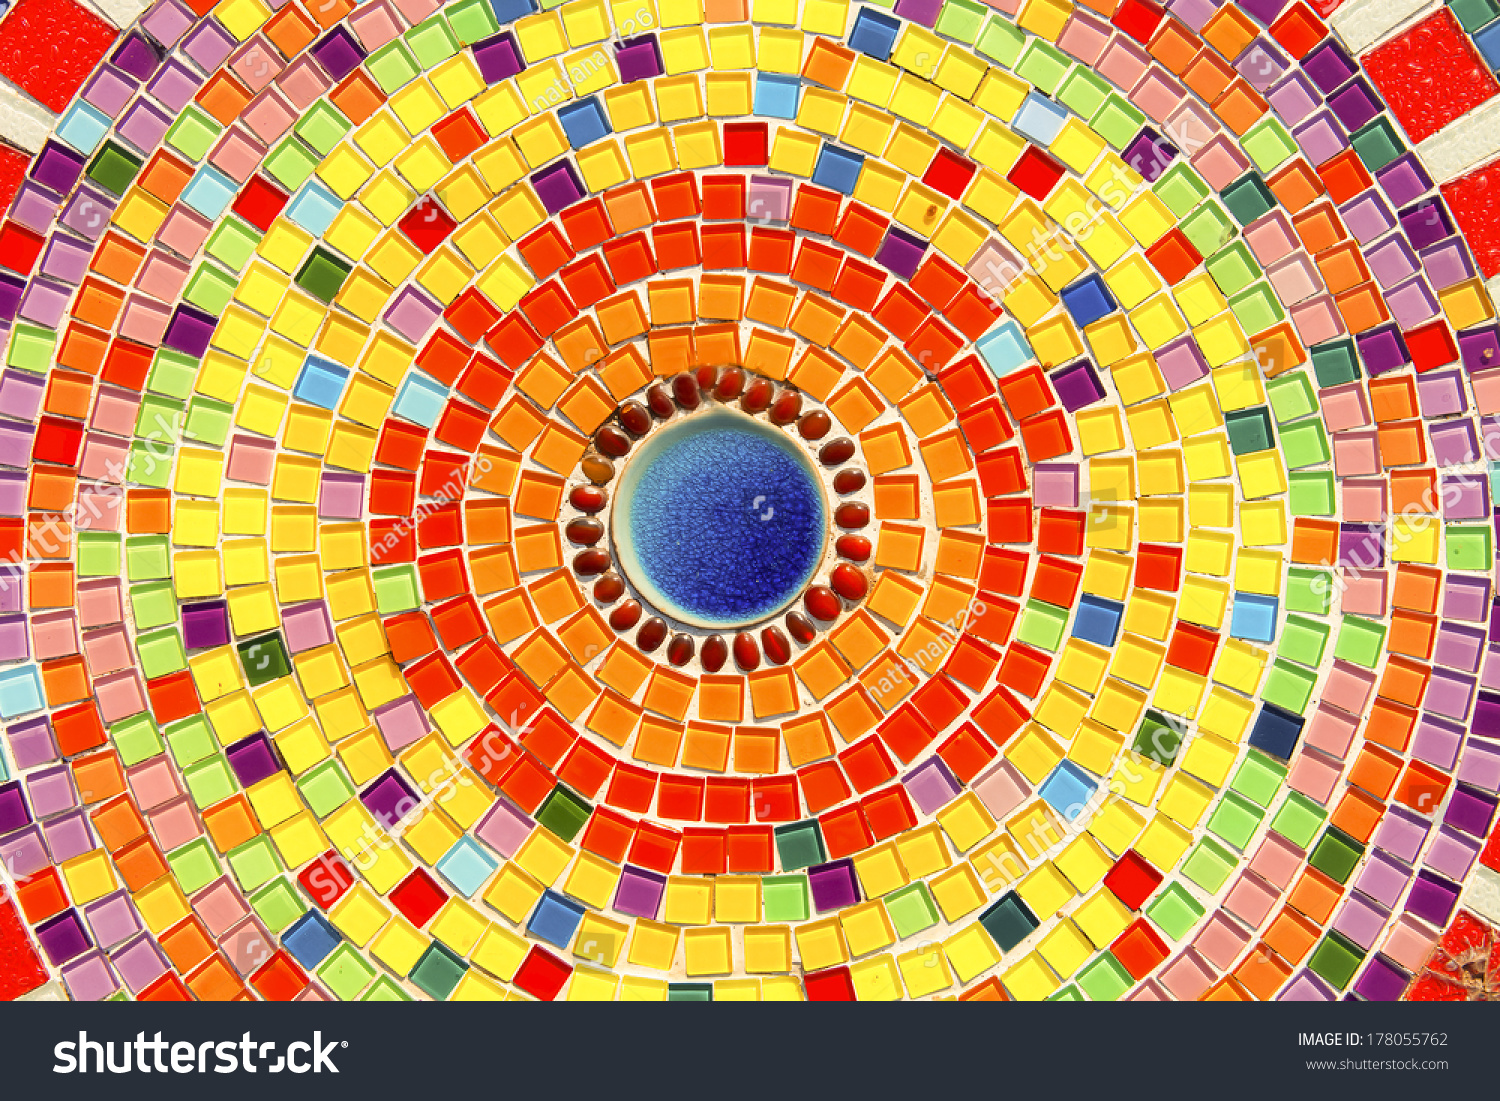 [Jeu] Association d'images - Page 15 Stock-photo-colorful-mosaic-flooring-or-walls-178055762